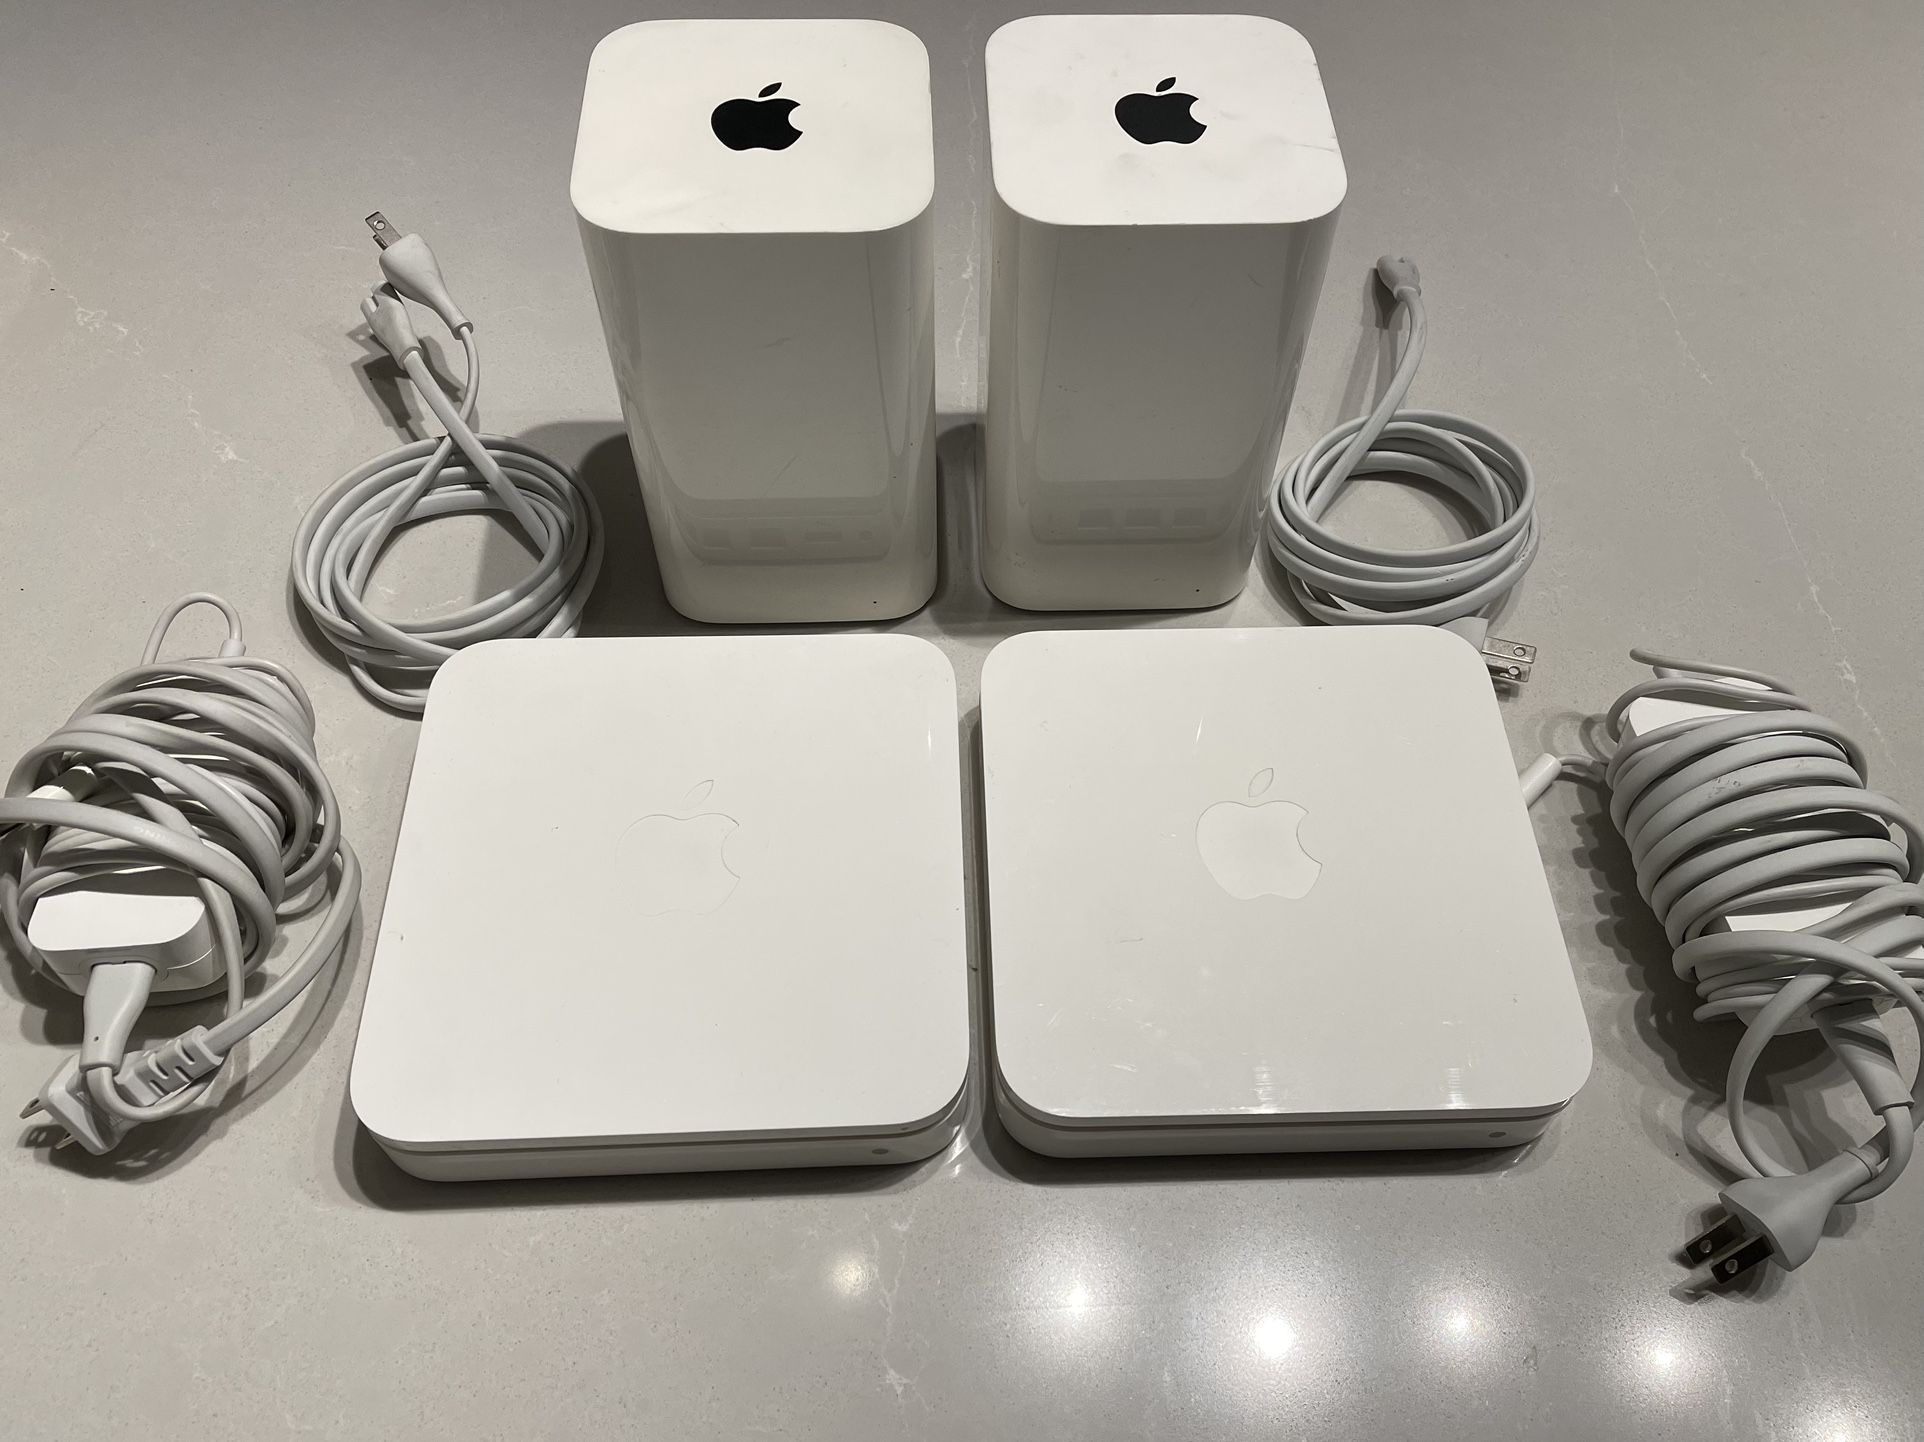 Set of 4 Apple AirPort Extreme WiFi Routers